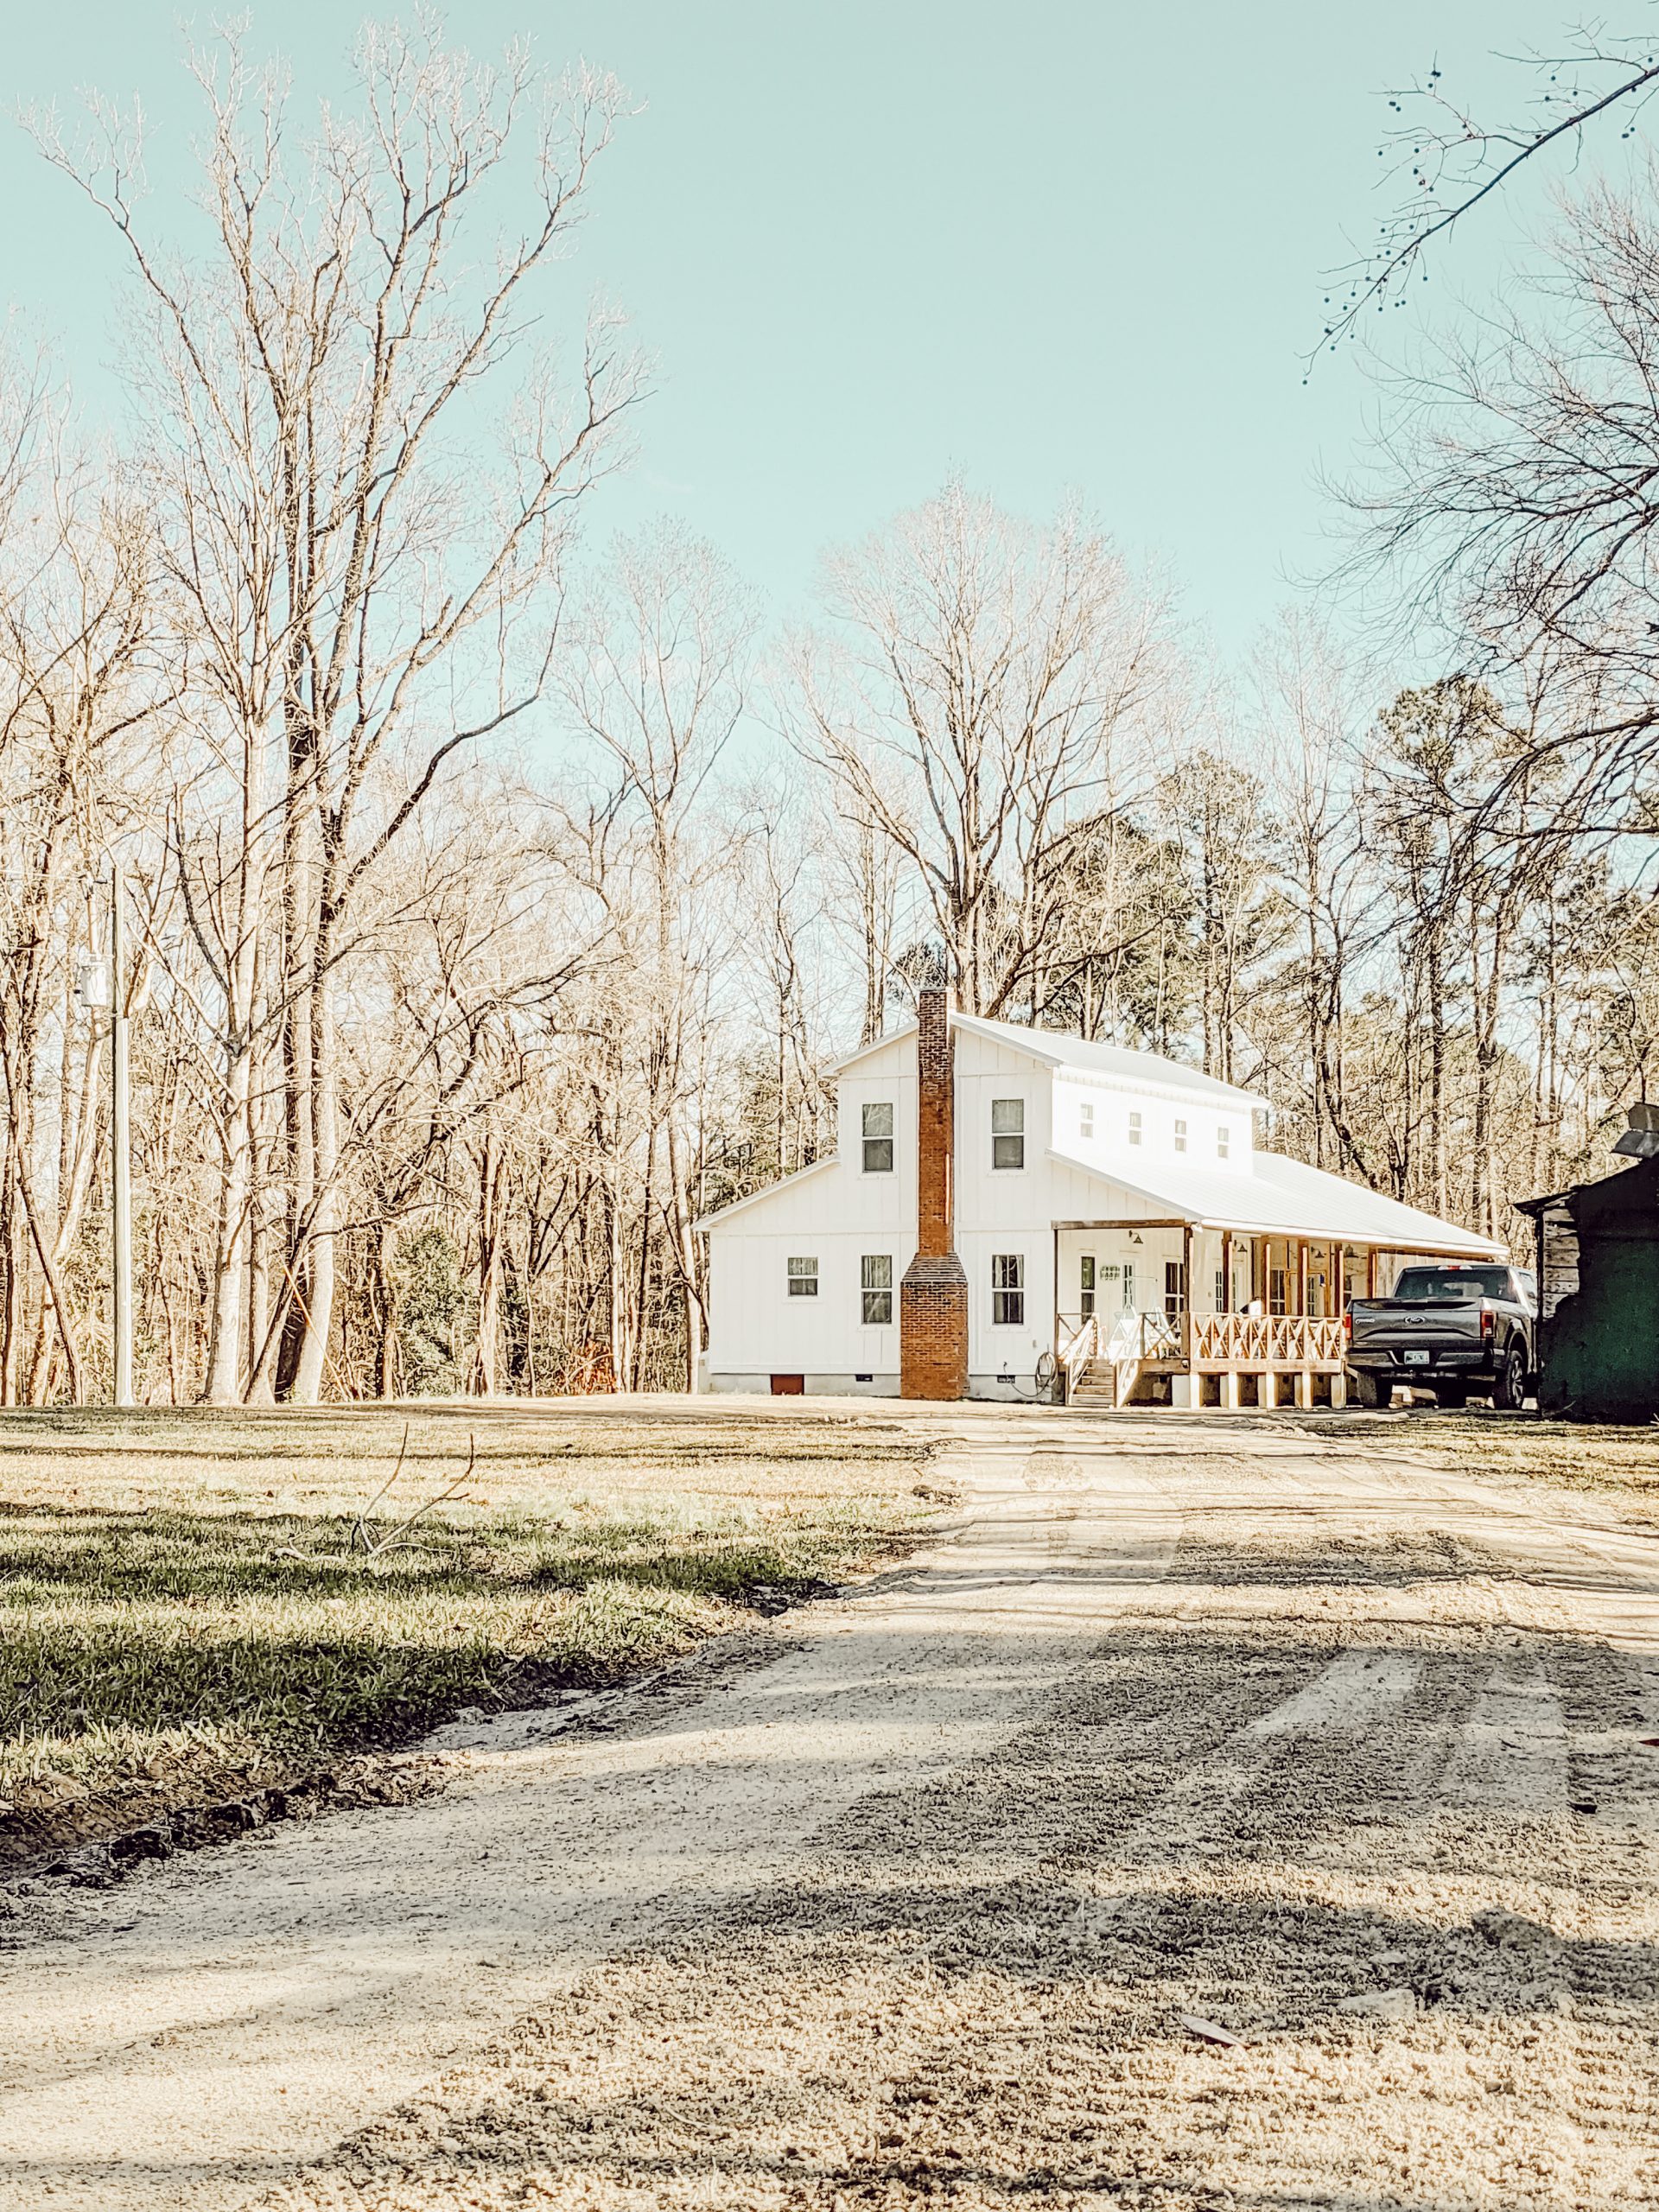 renovated farmhouse at the end of an old dirt road